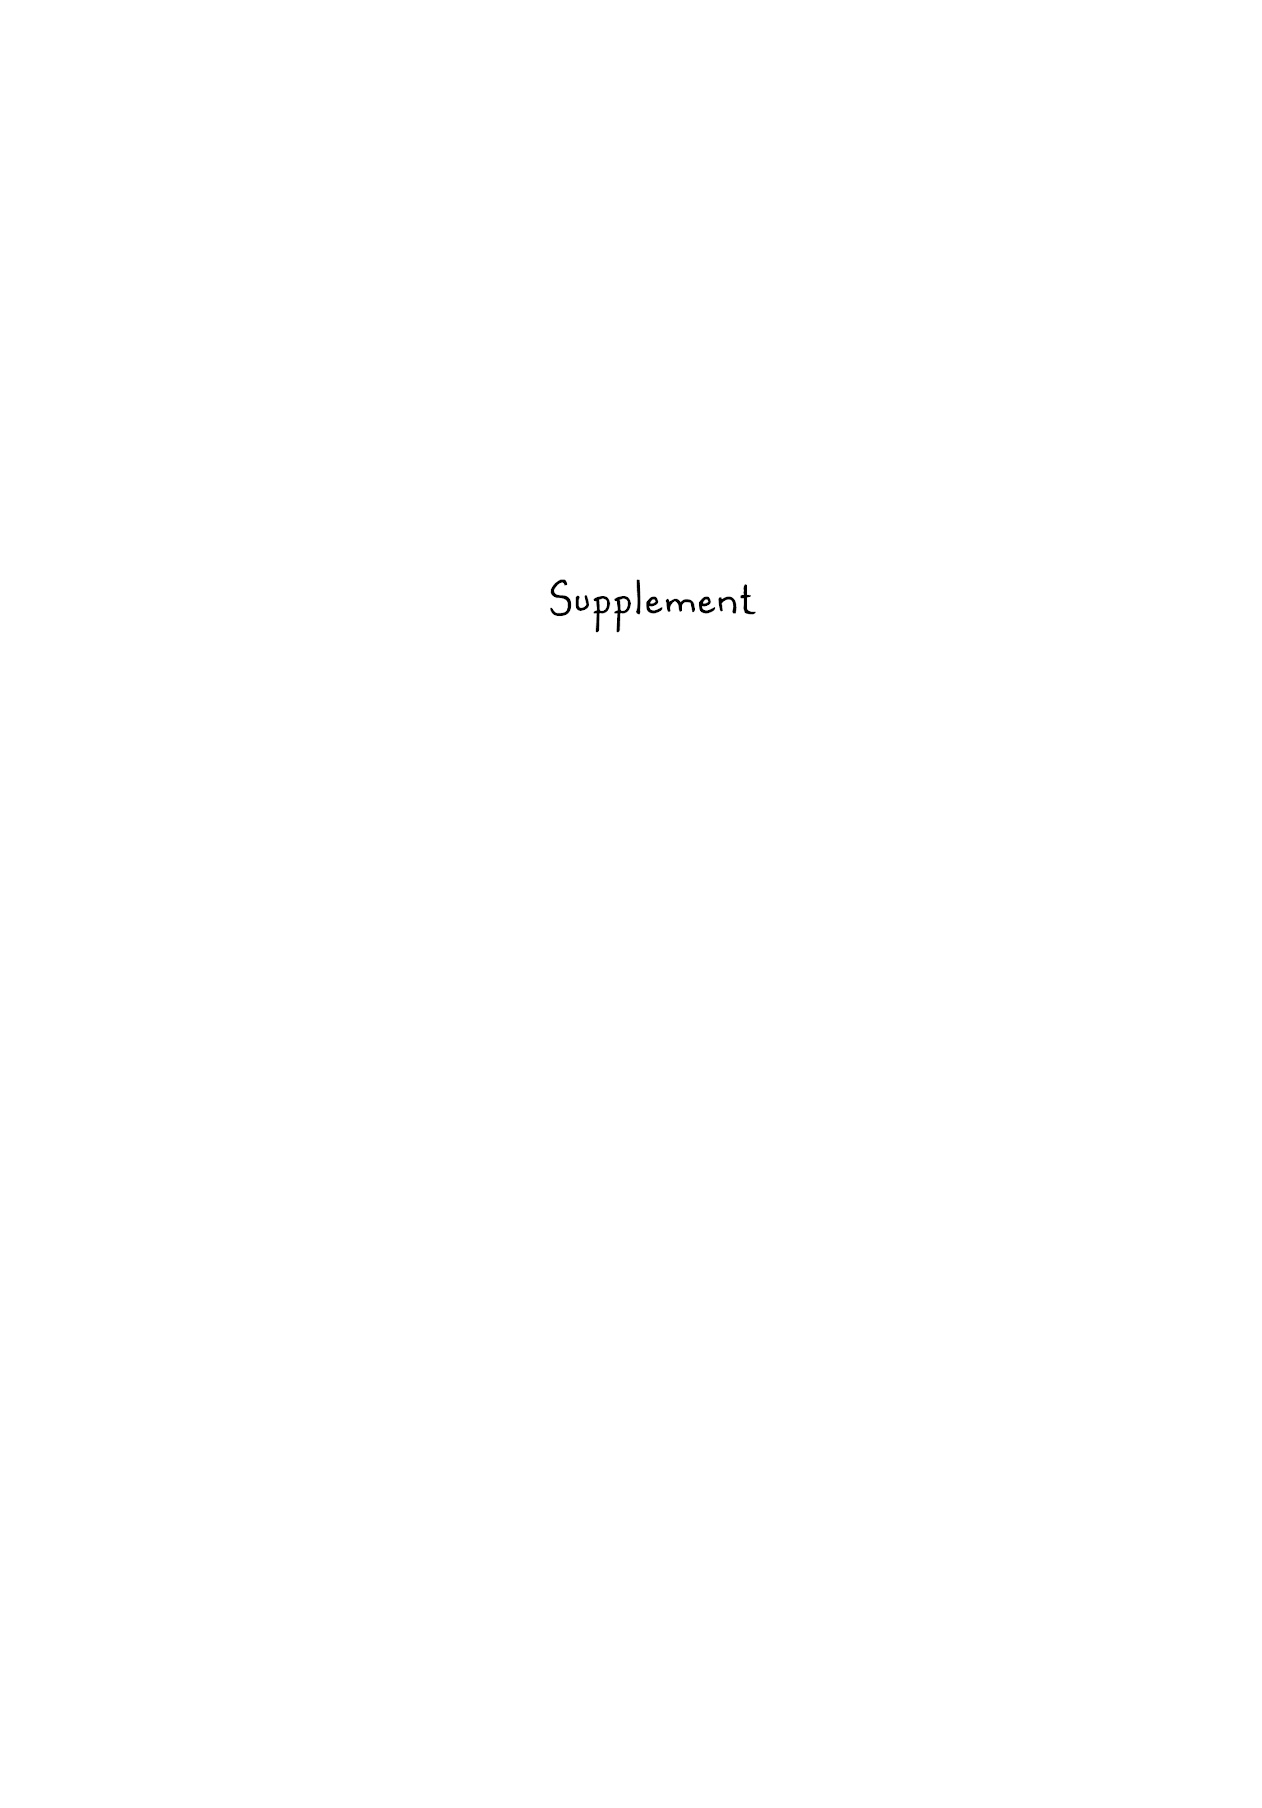 Title page reading: "Supplement"